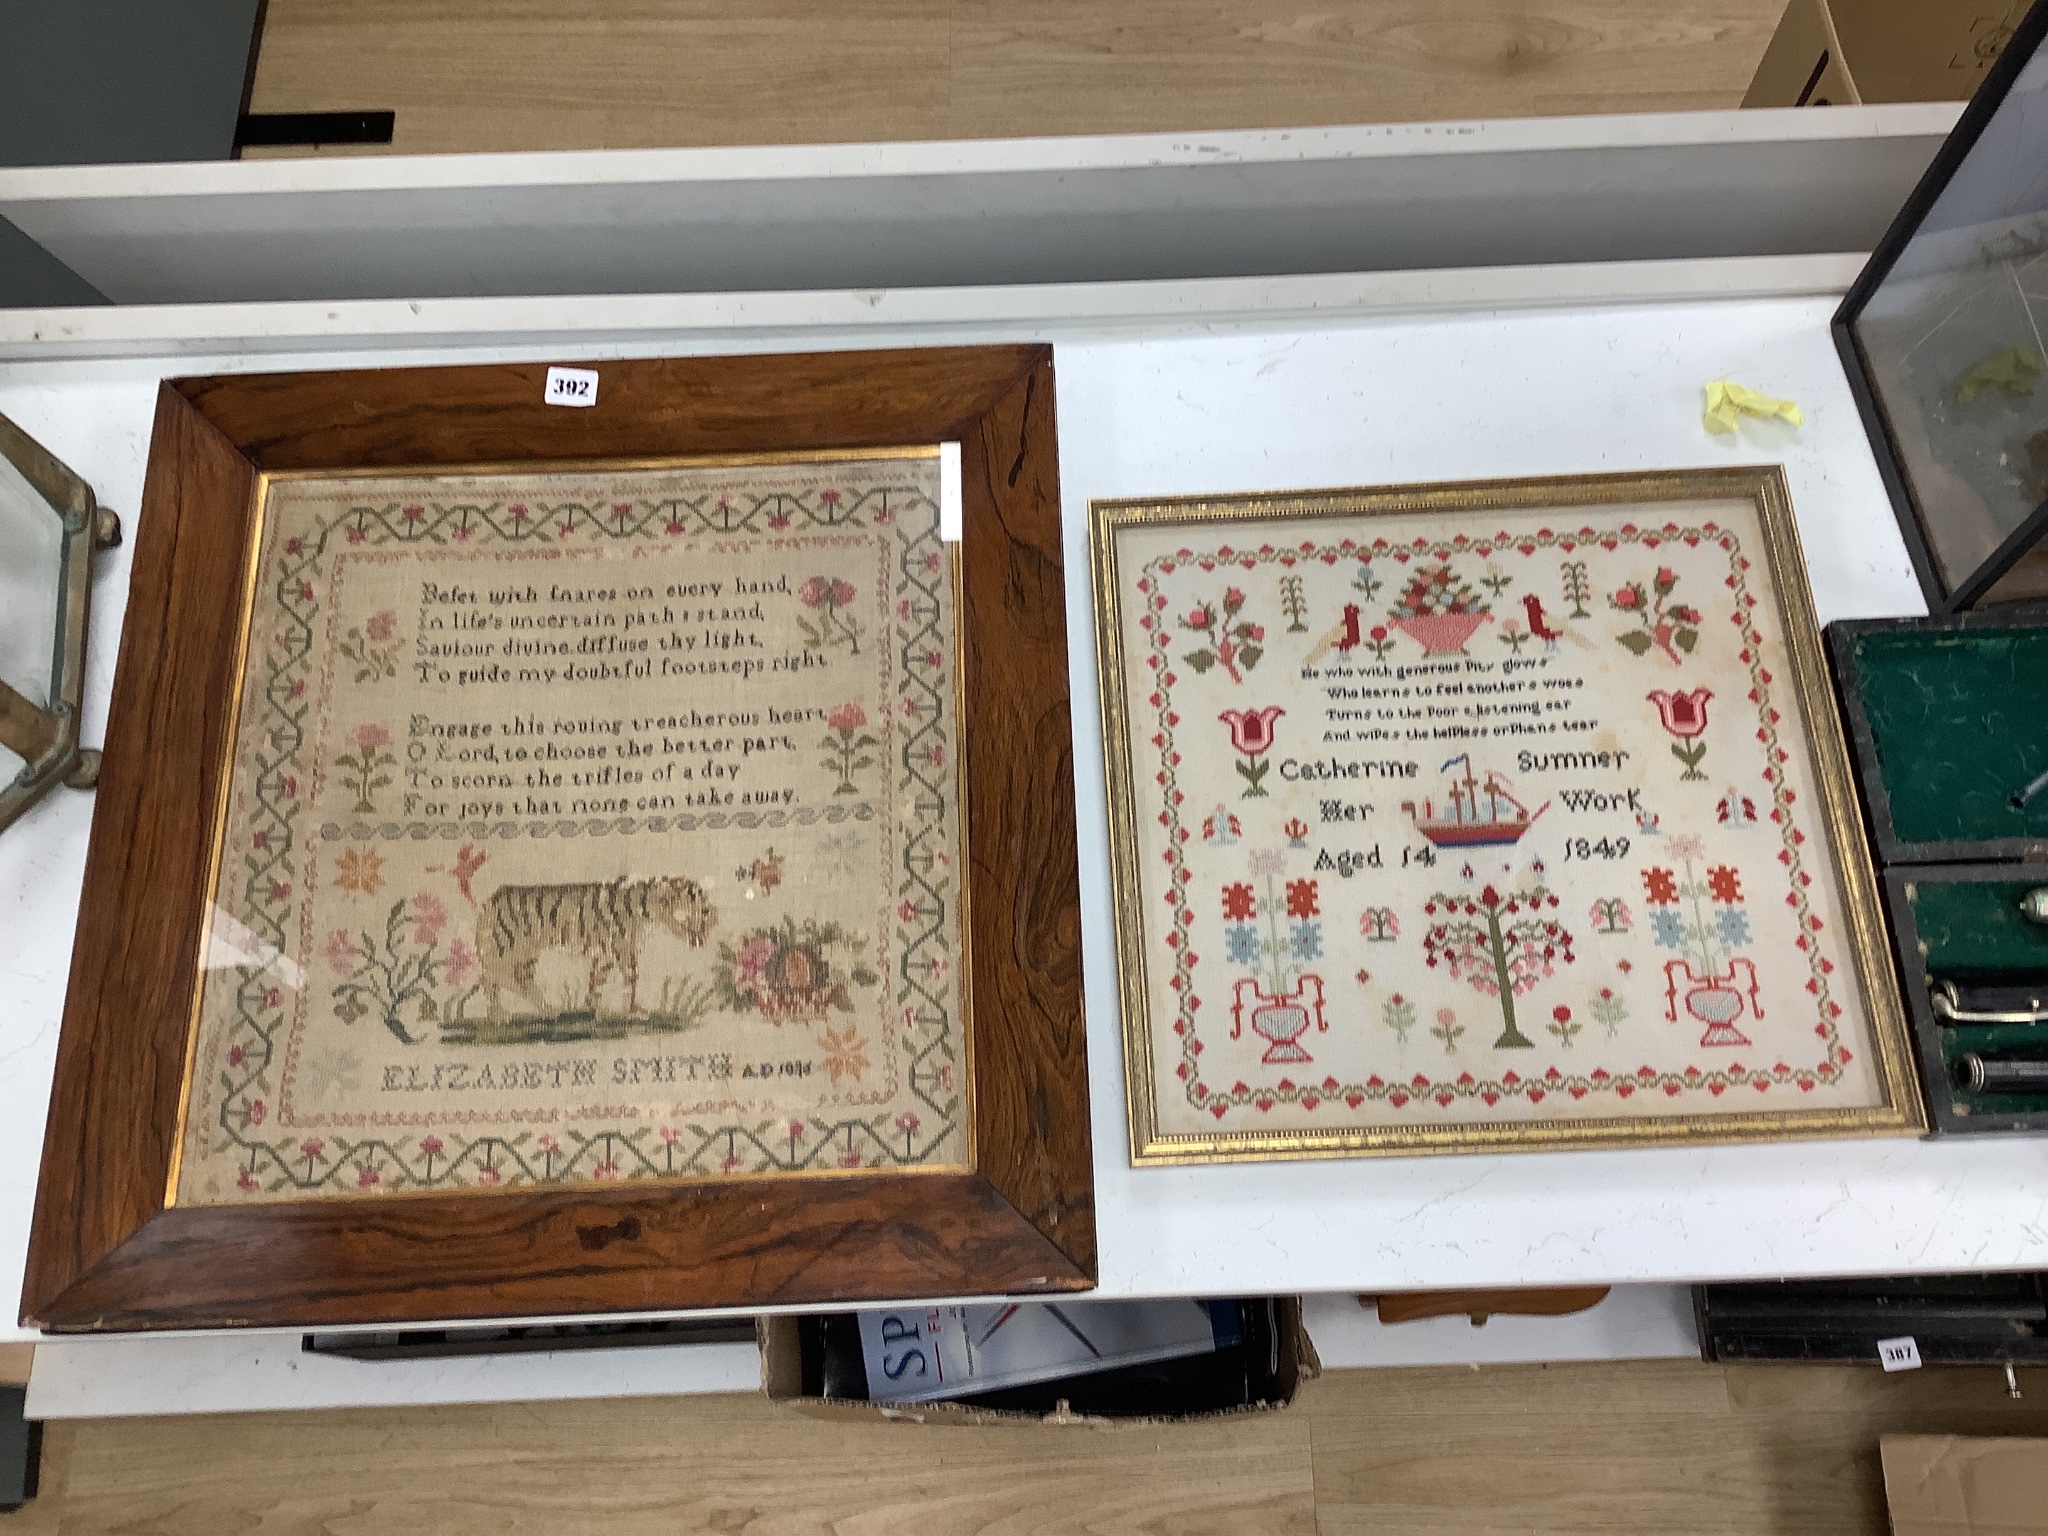 A William IV needlework sampler, worked with text and a lion, by Elizabeth Smith, dated 1836 and a Victorian needlework sampler, by Catherine Summer, dated 1849